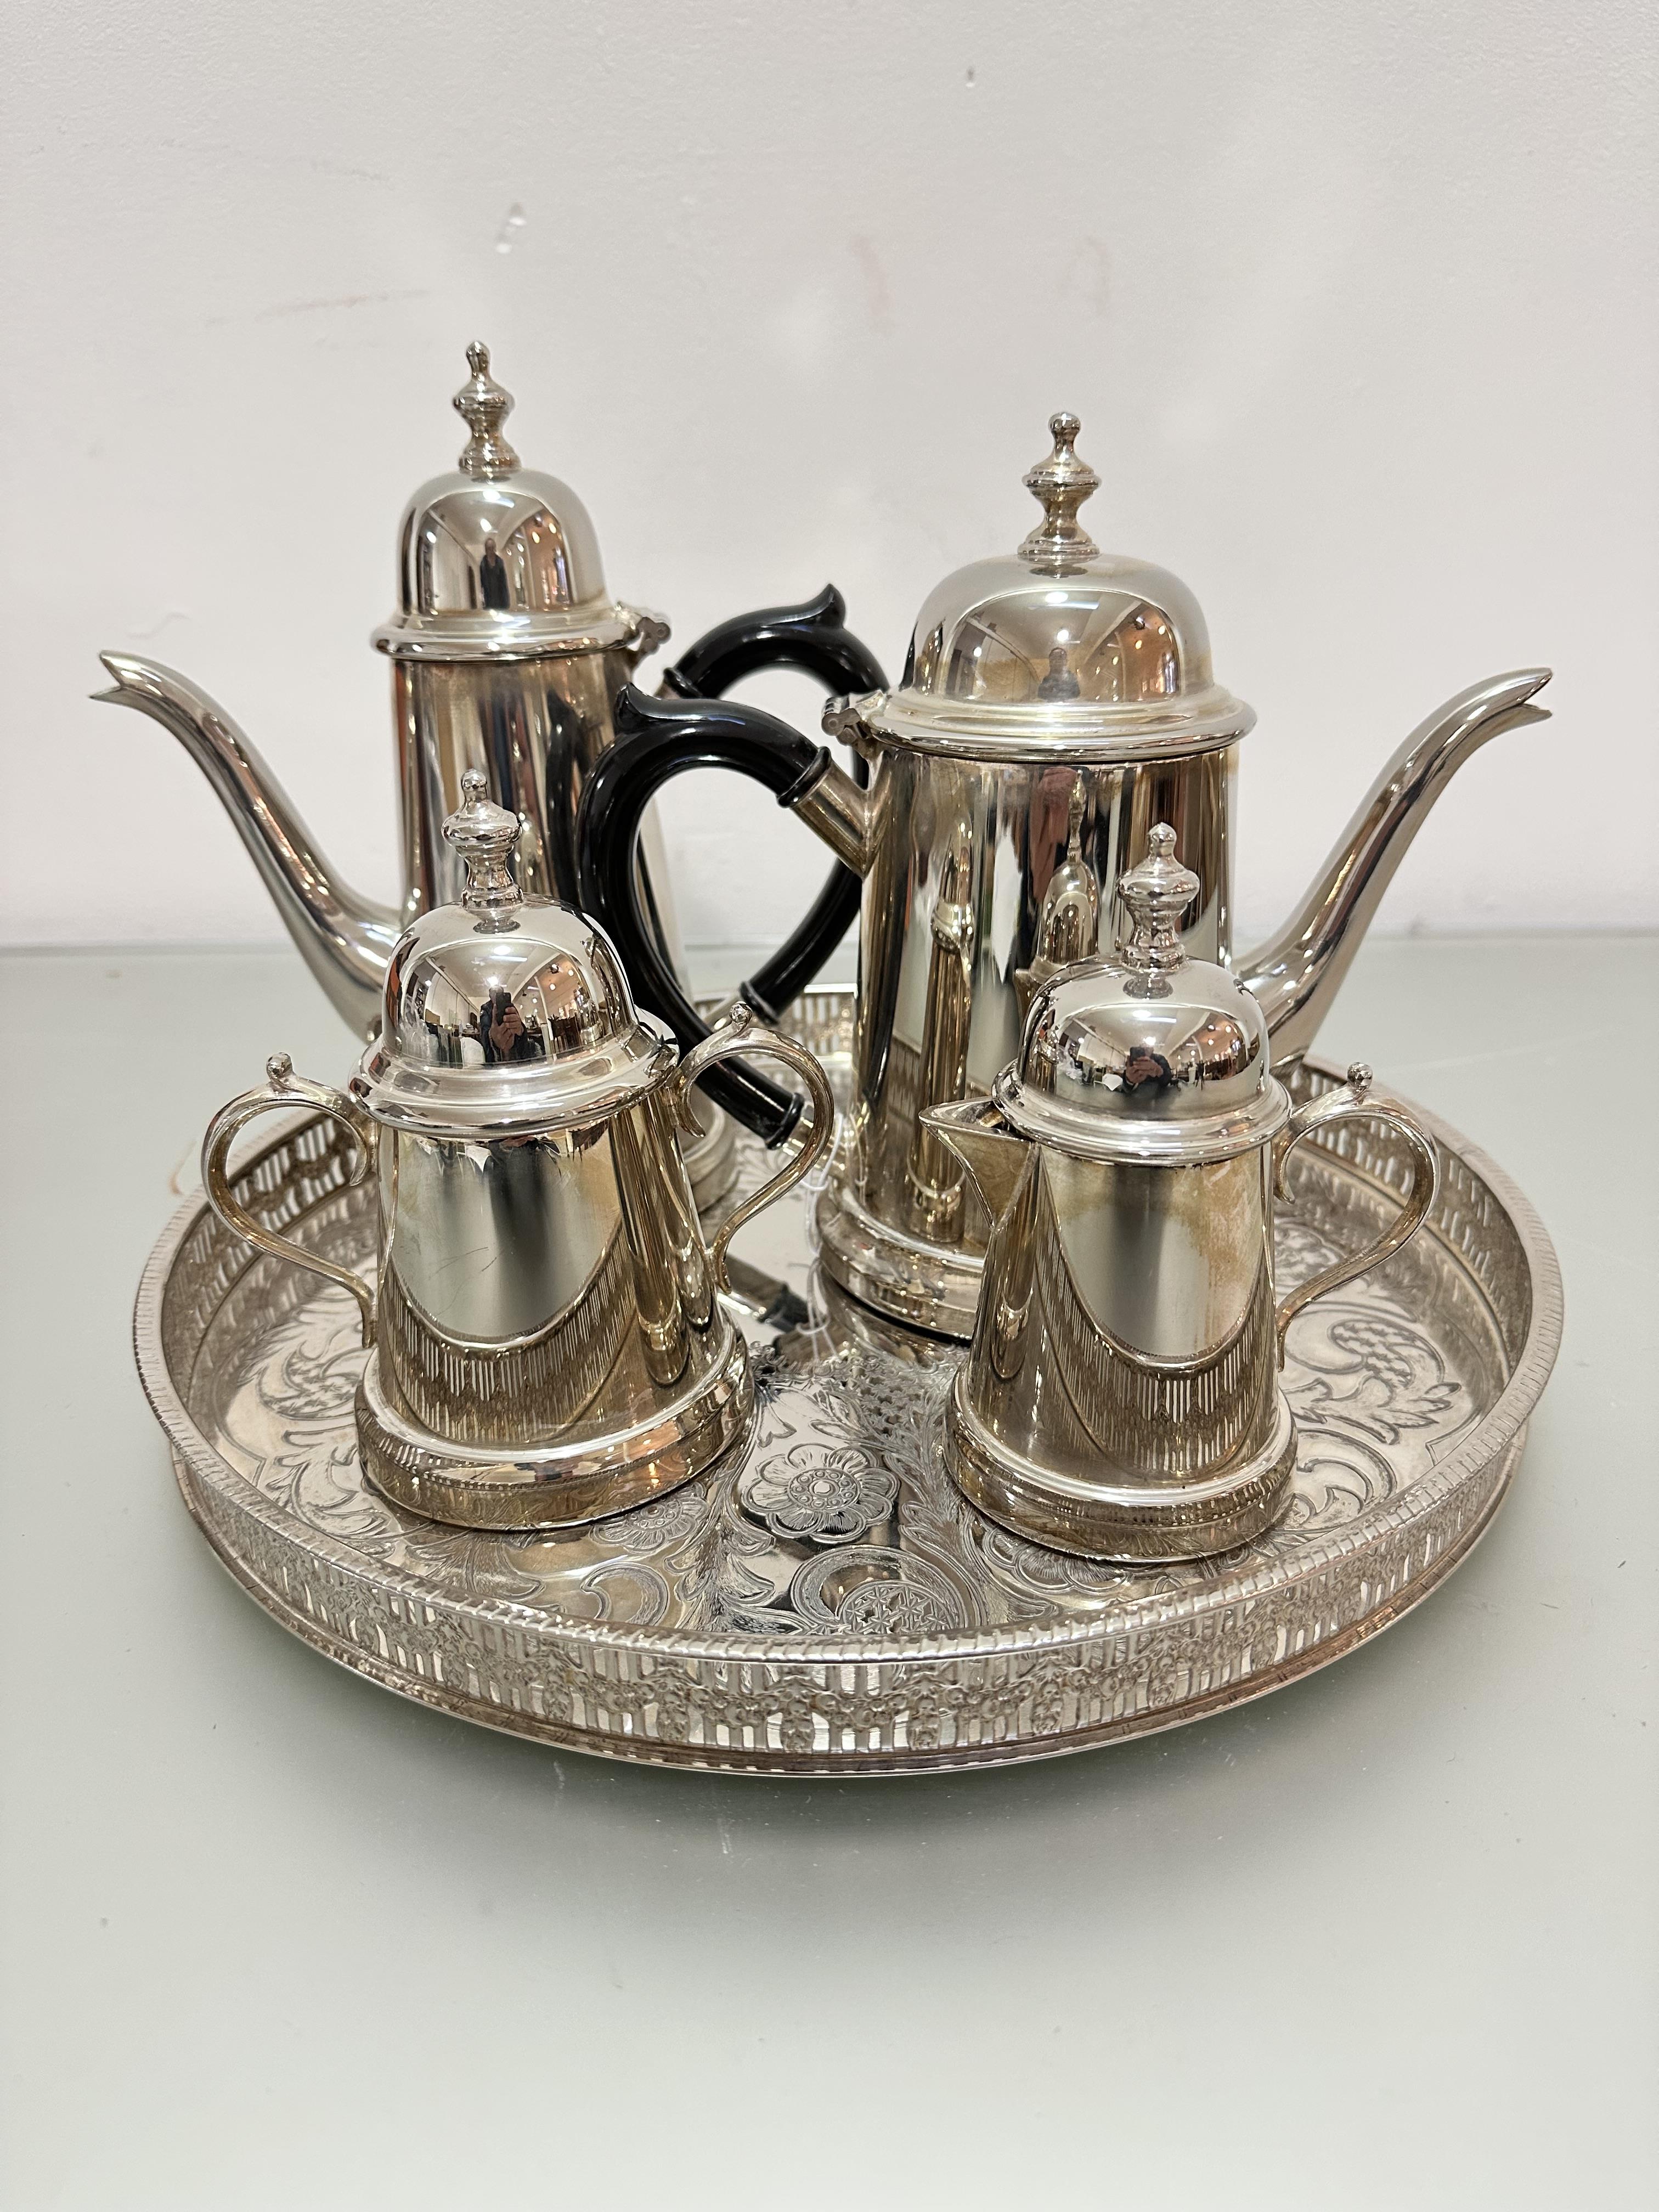 An Epns circular galleried tea tray with engraved decoration, (h 3cm x d 31cm) and a 4-piece Epns